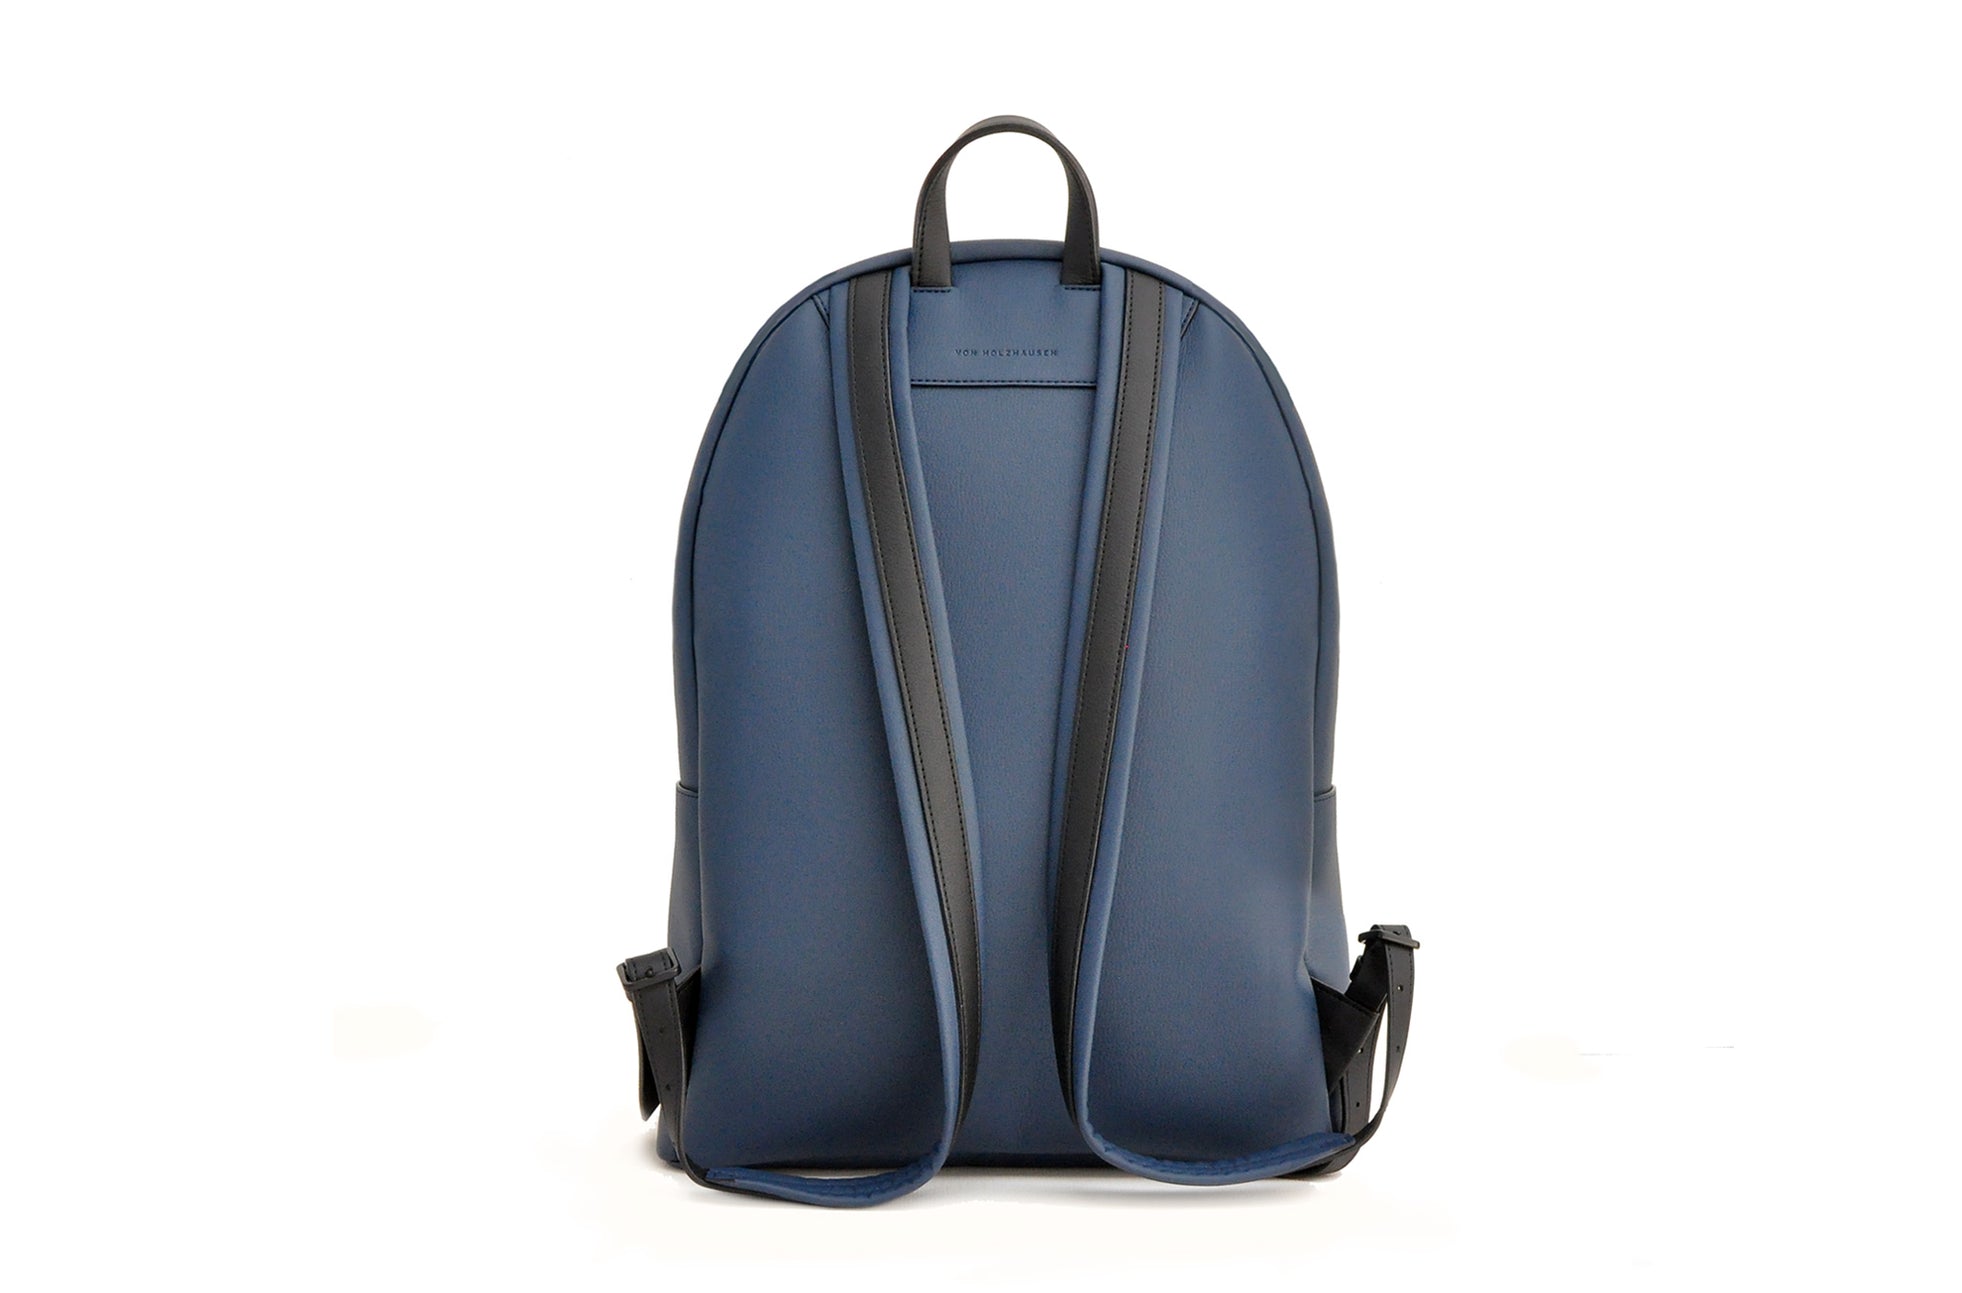 The Classic Backpack in Technik in Denim and Black image 5